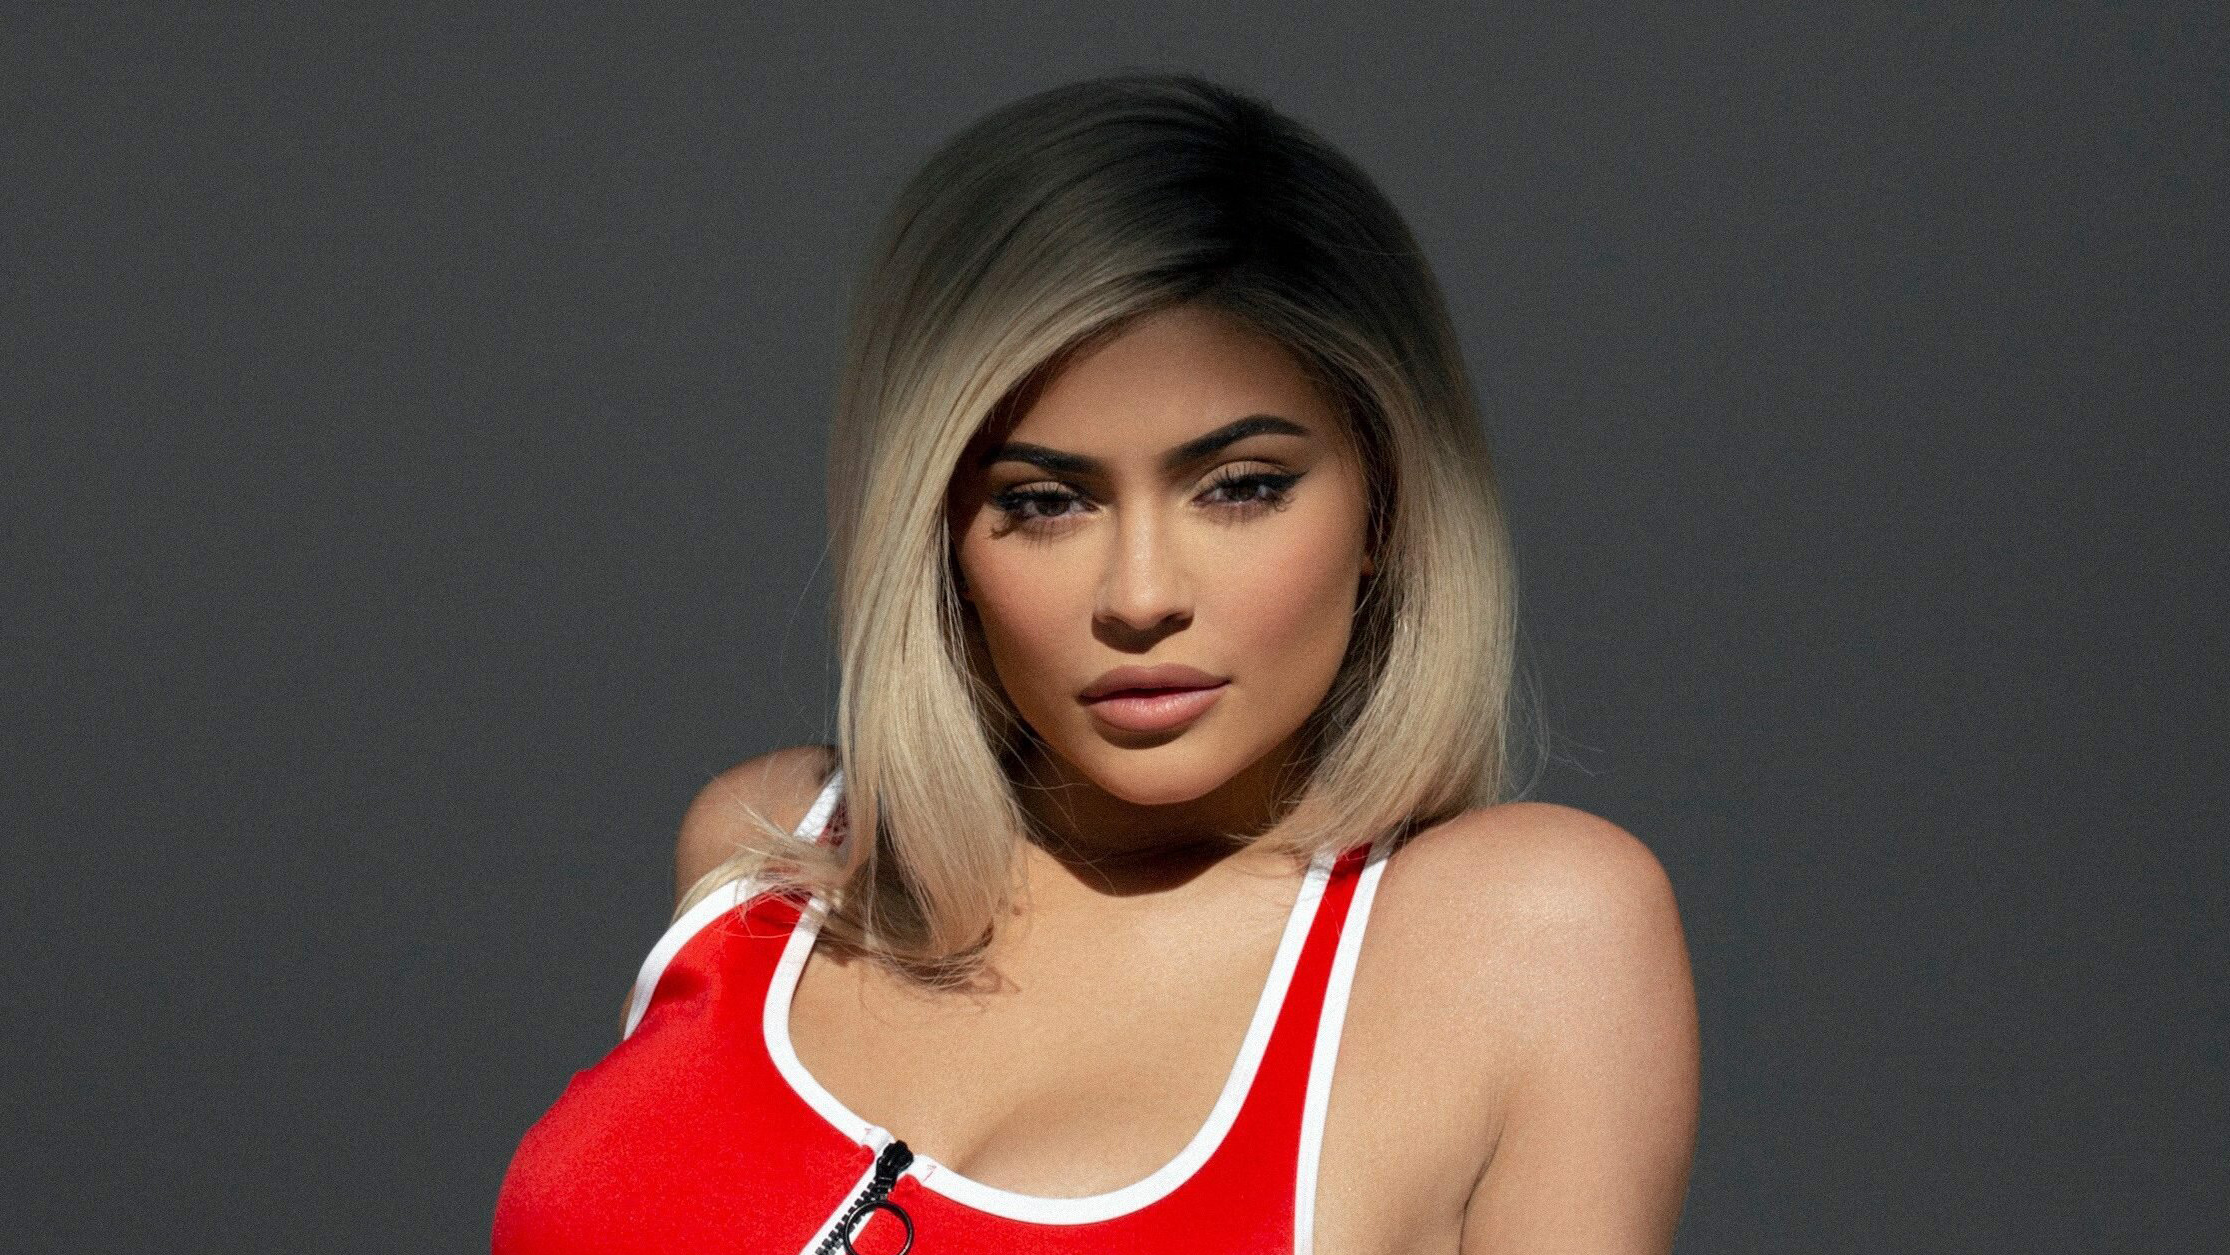 Kylie Jenner Wallpaper Download New 67 HD Image & Latest Pics